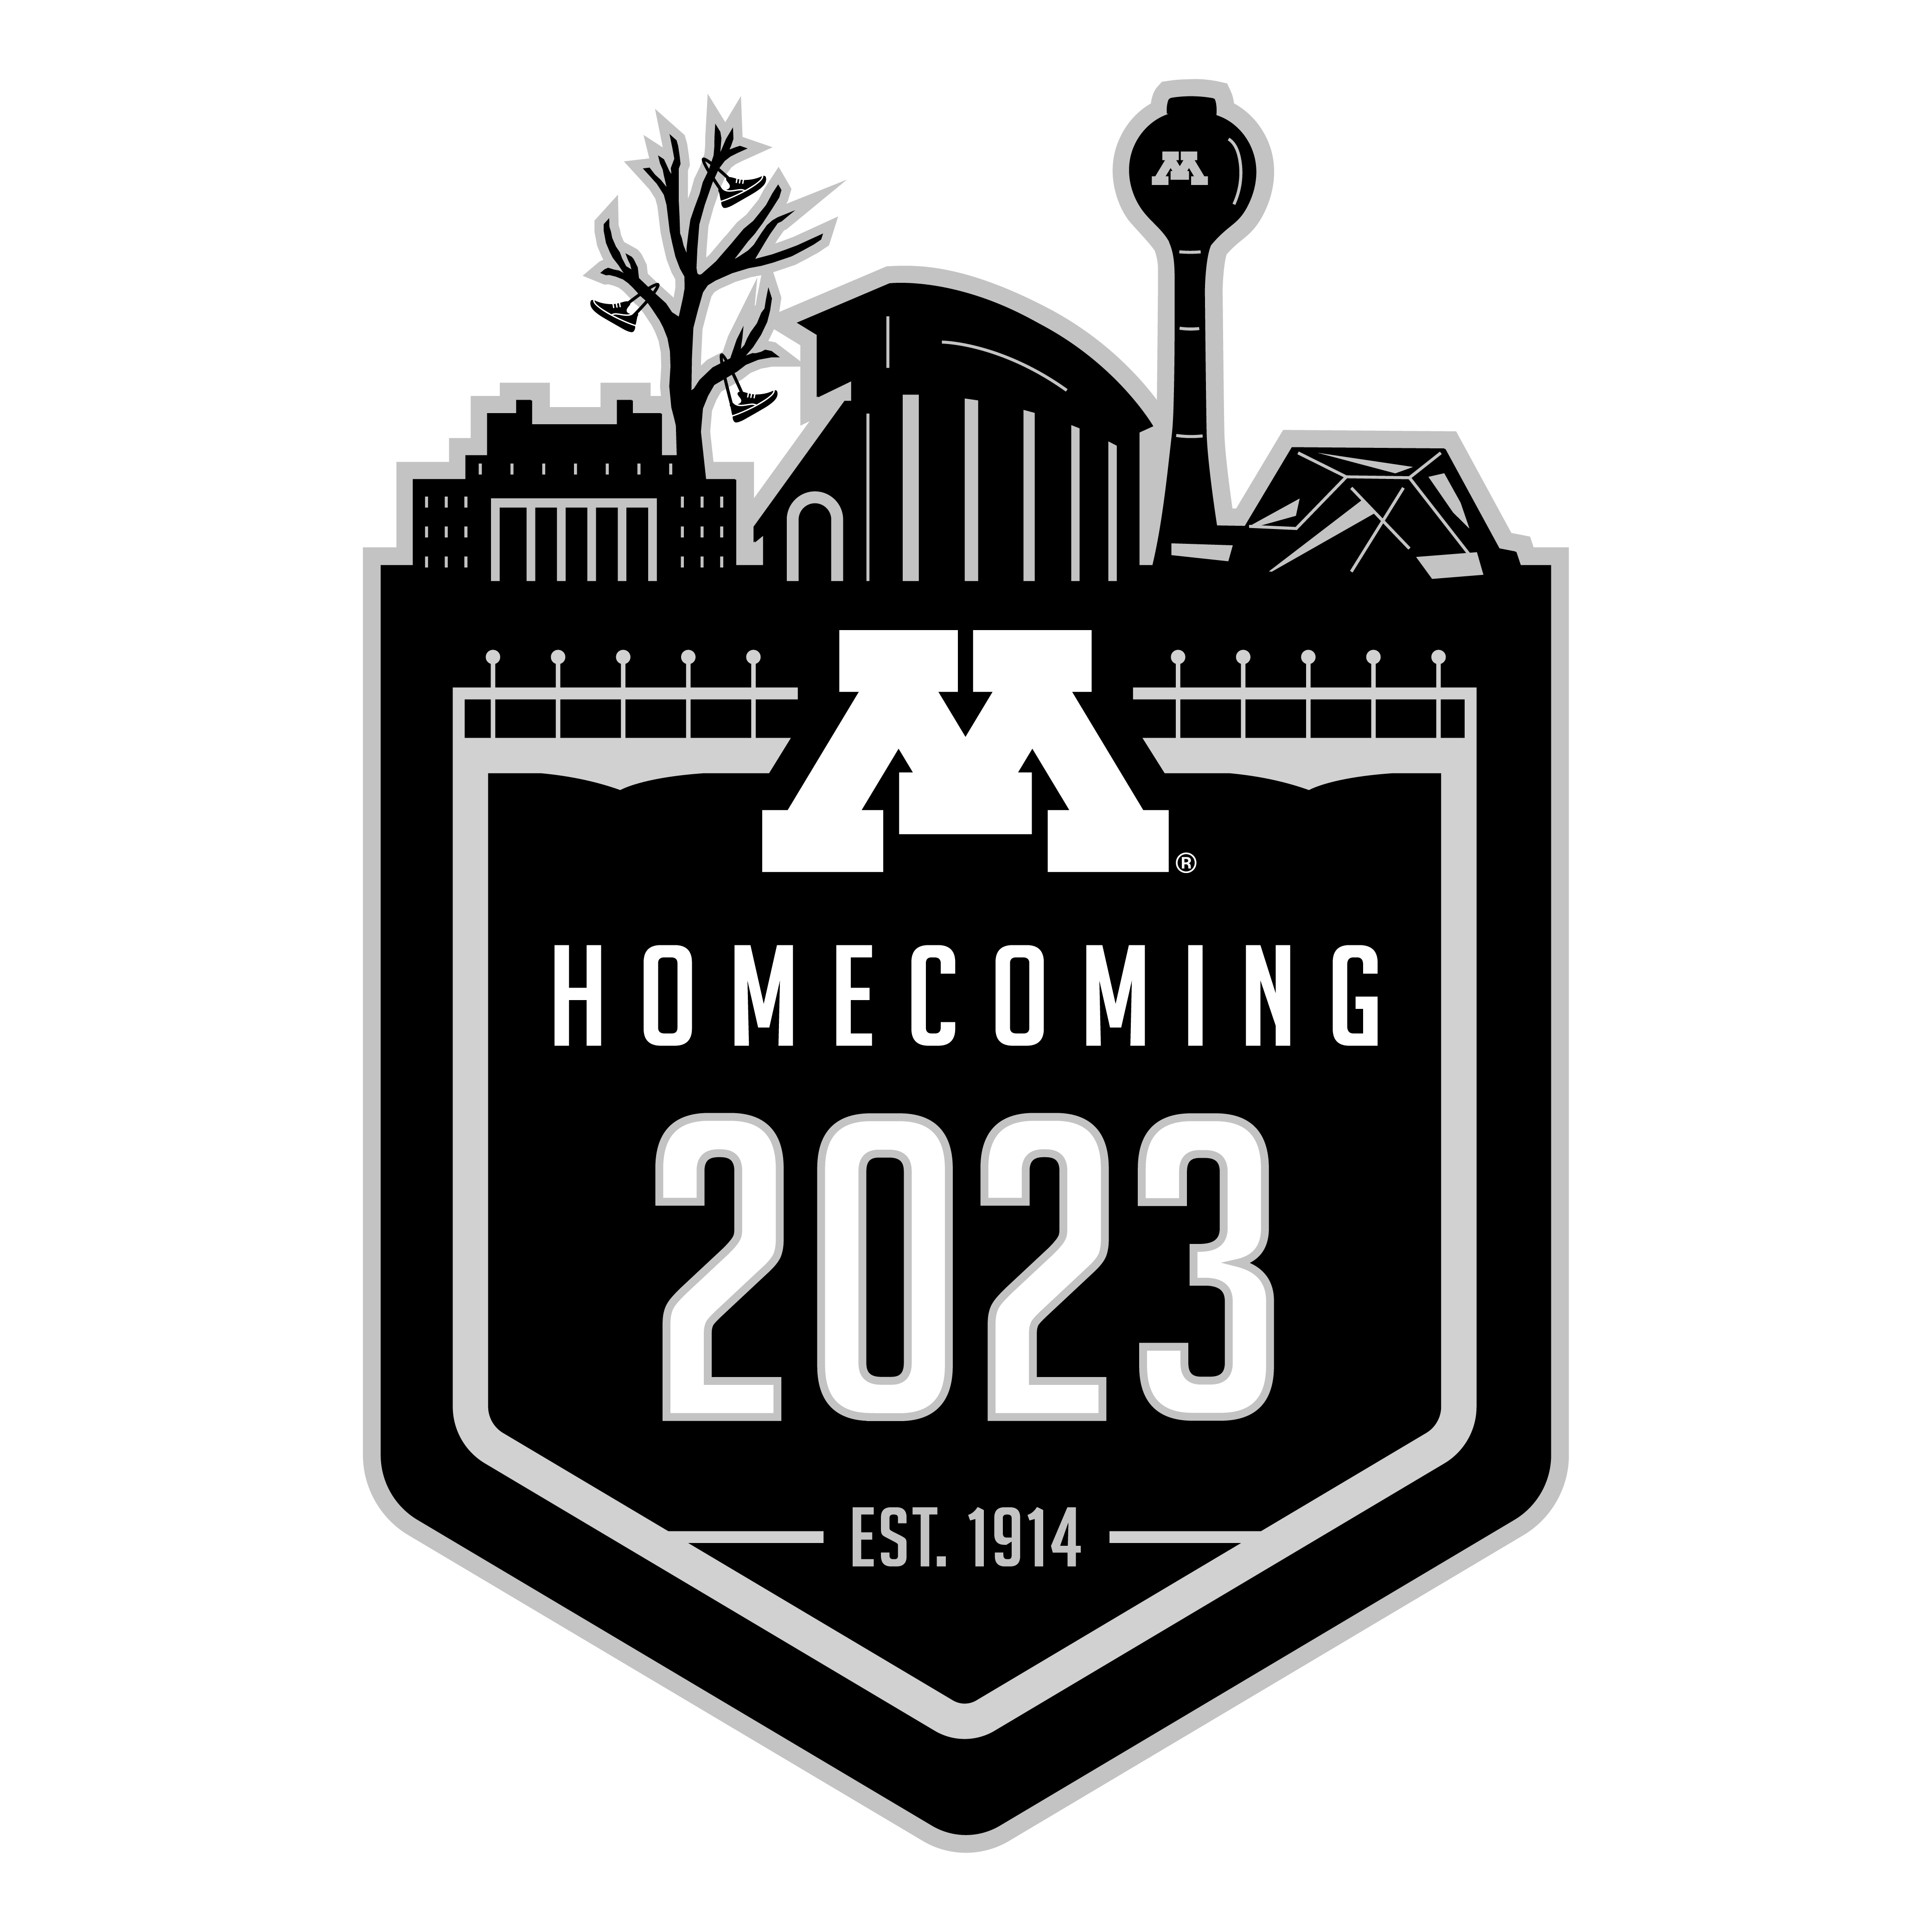 Homecoming logo black and grayscale